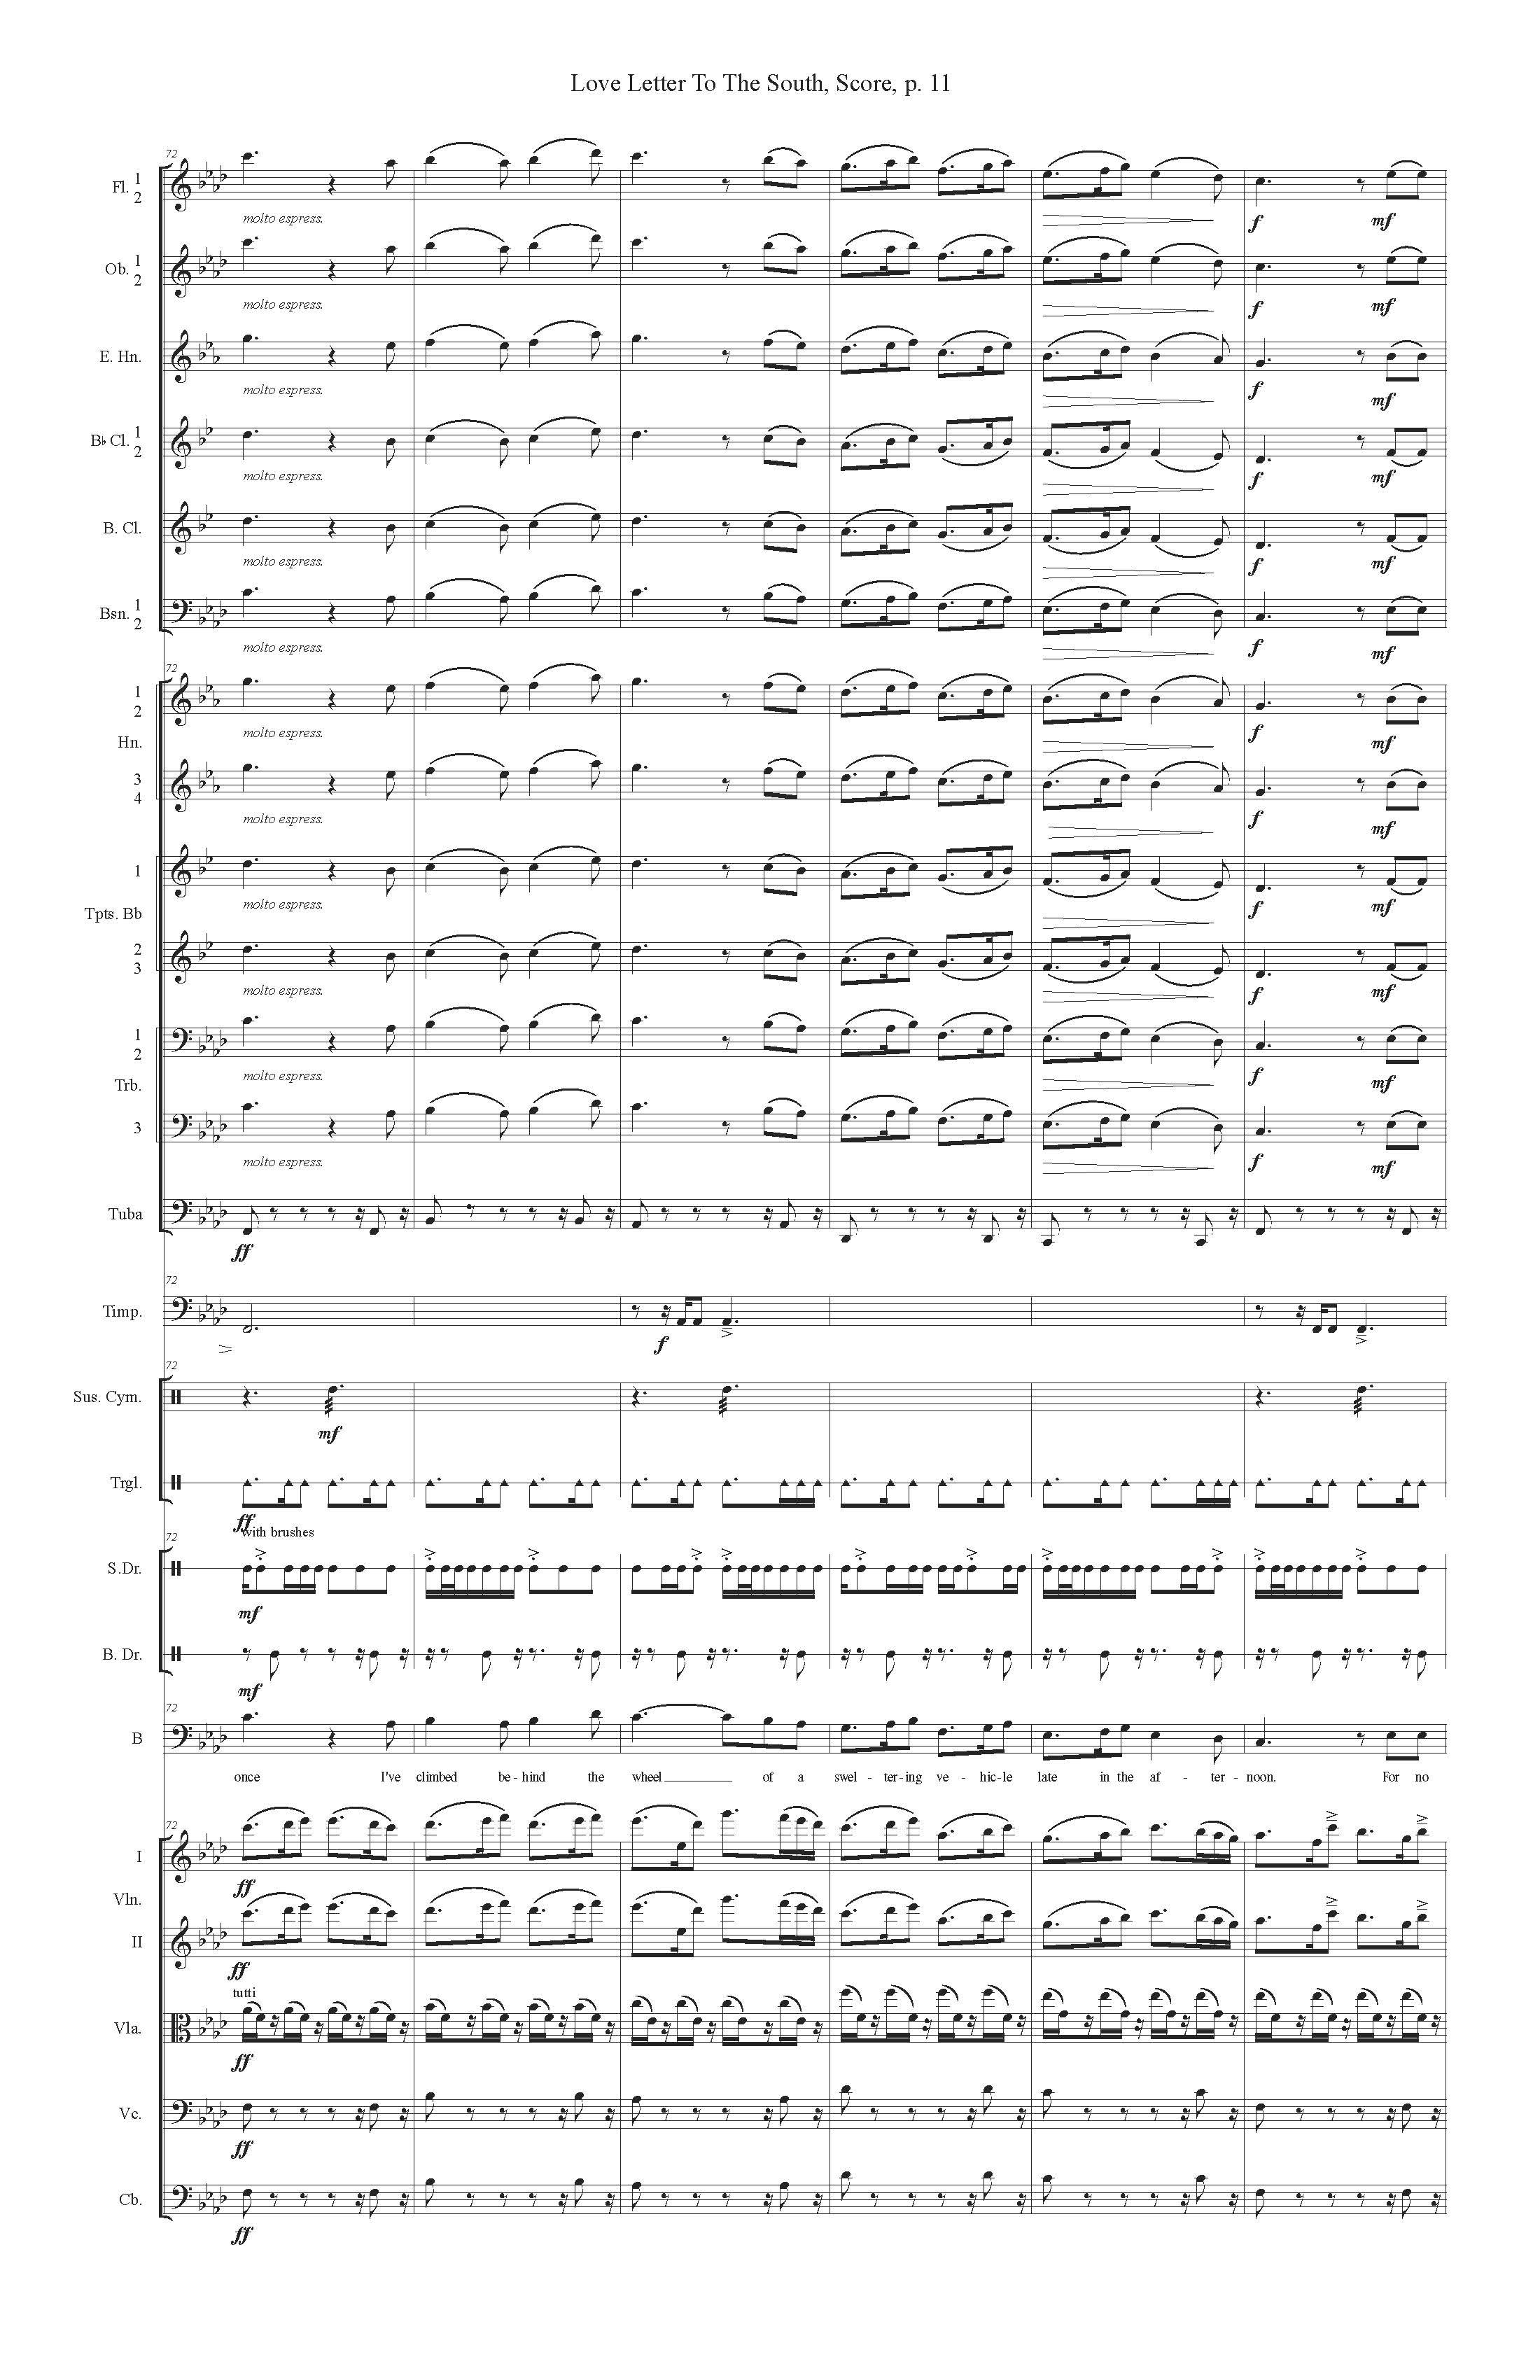 LOVE LETTER TO THE SOUTH ORCH - Score_Page_11.jpg